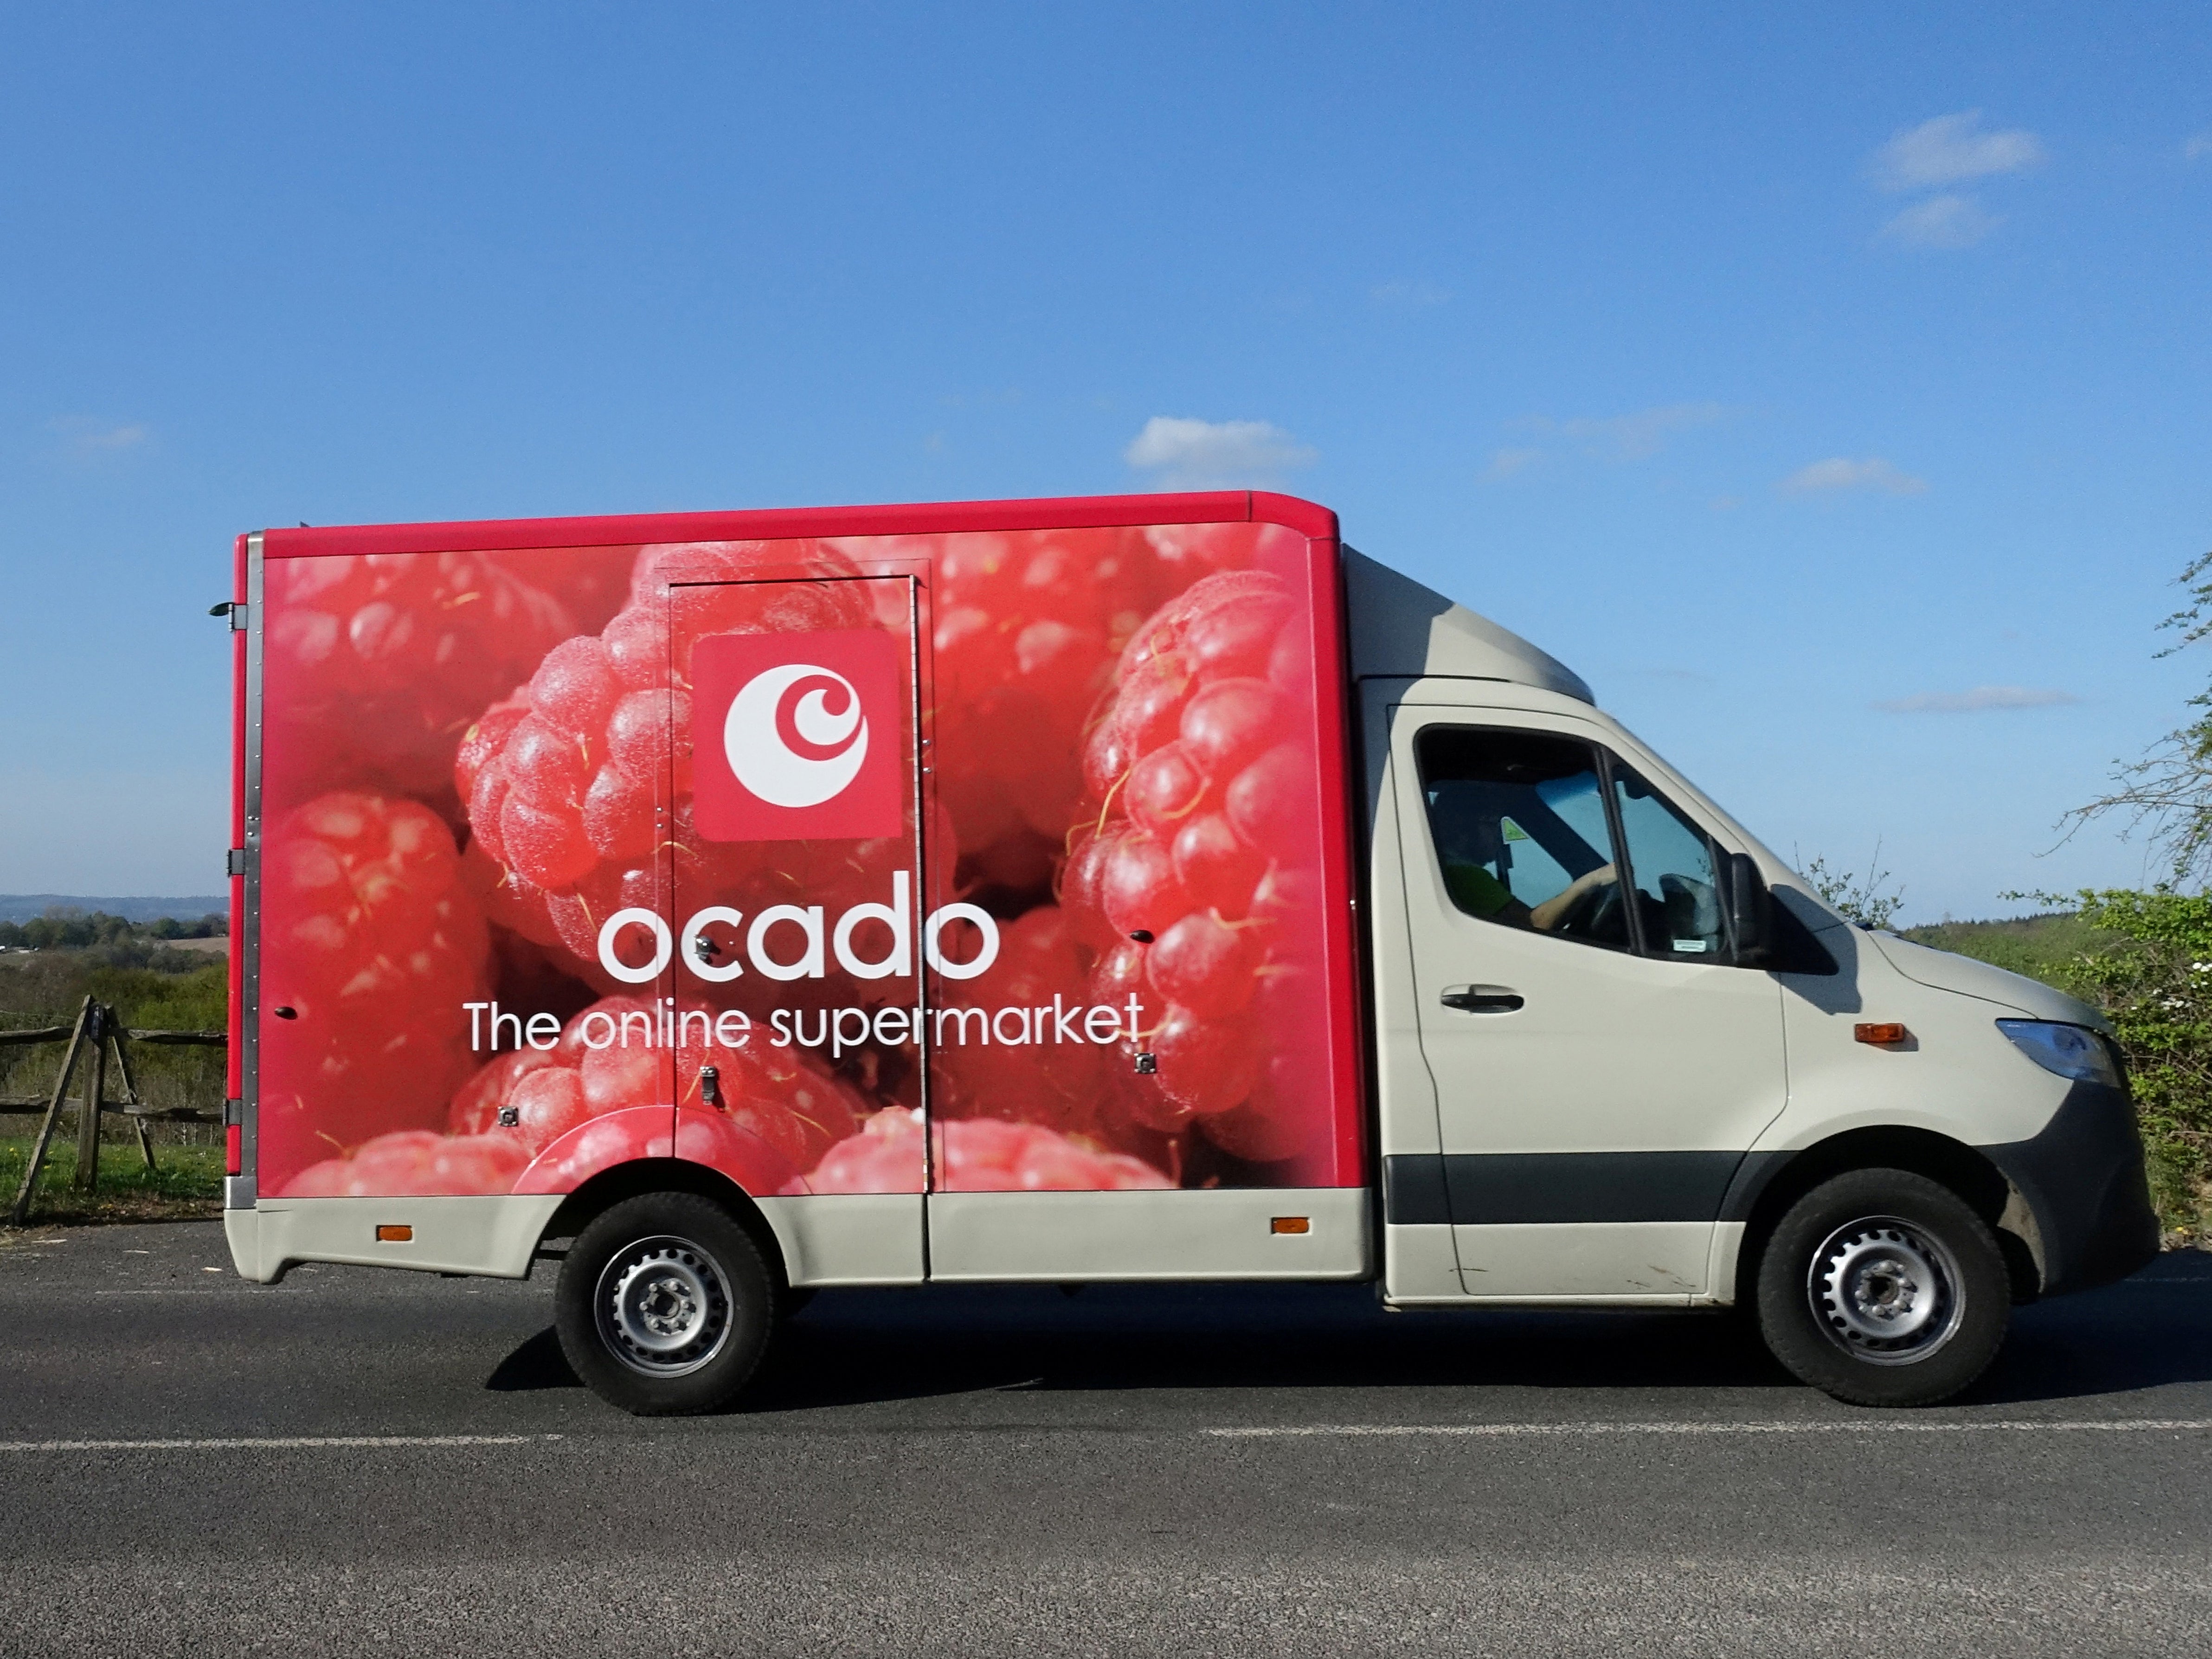 Ocado’s sales have boomed through the course of the pandemic